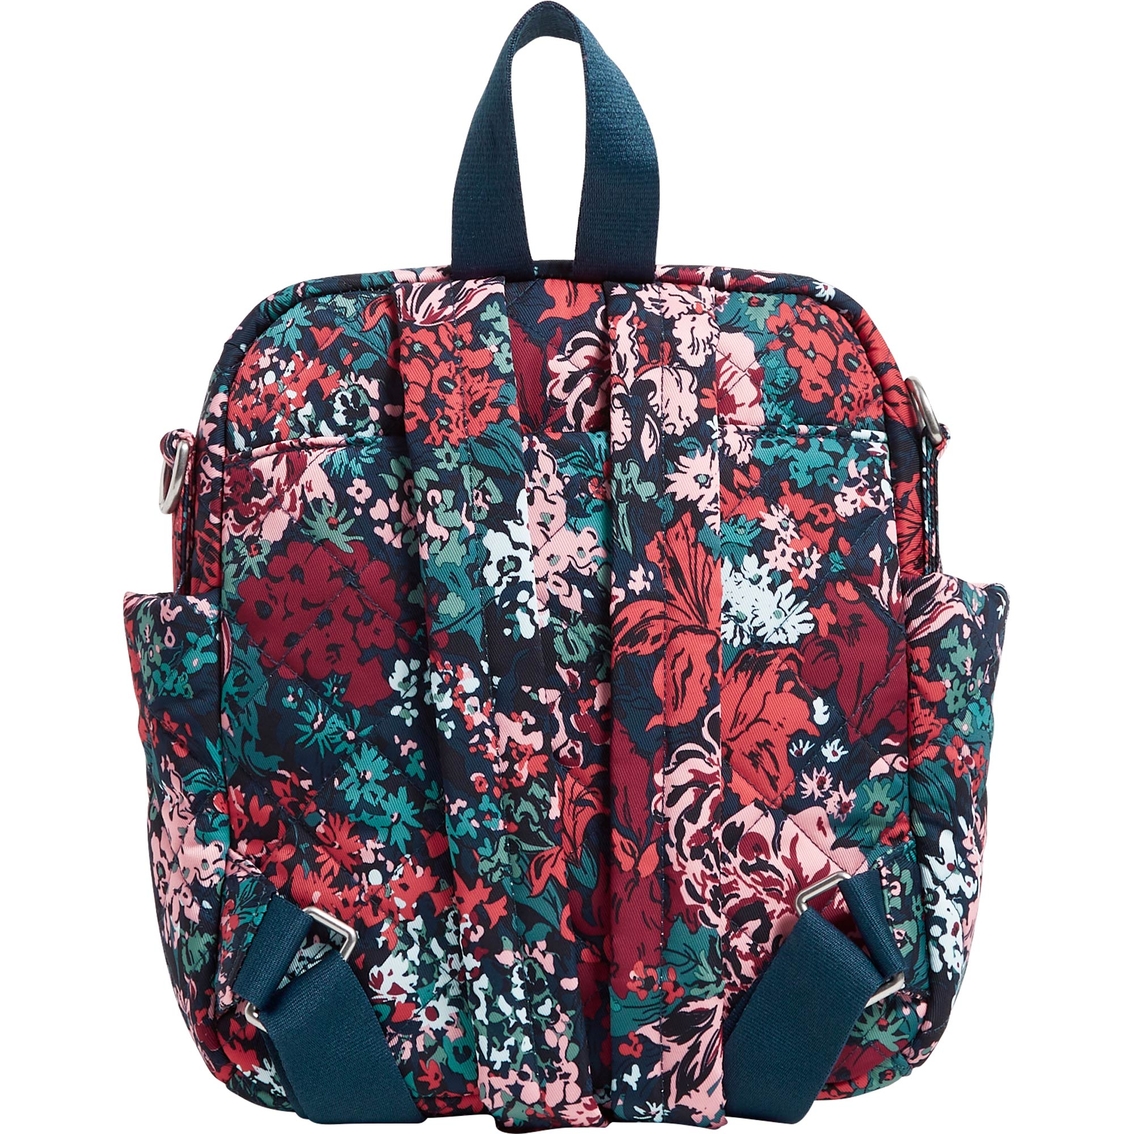 Vera Bradley Cabbage Rose Cabernet Convertible Small Backpack ...